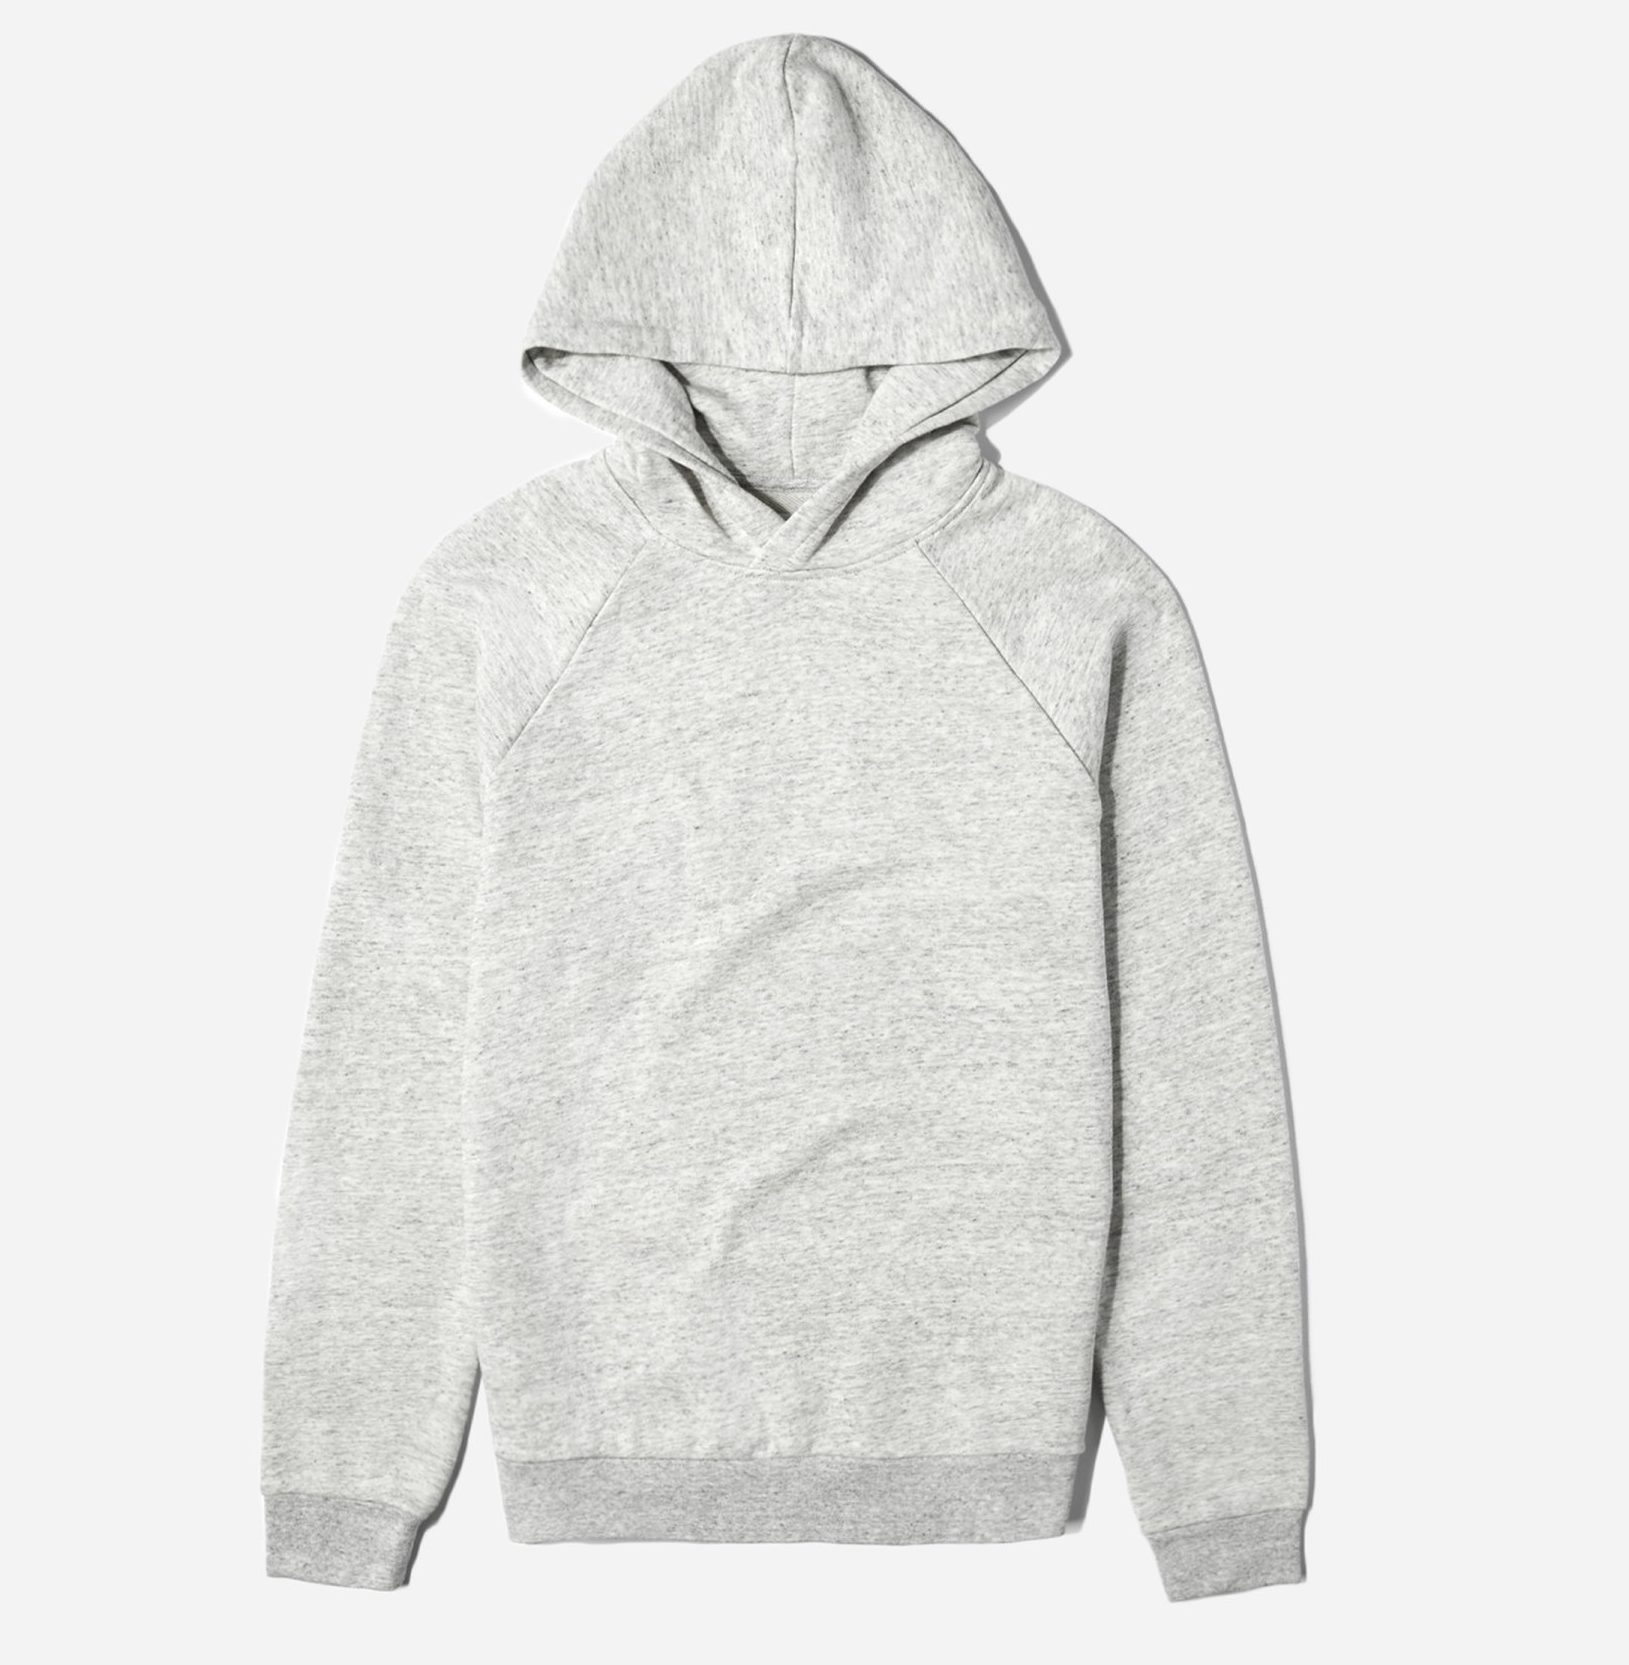 Brothers Gift Idea 2018: Everlane Pullover Hoodie